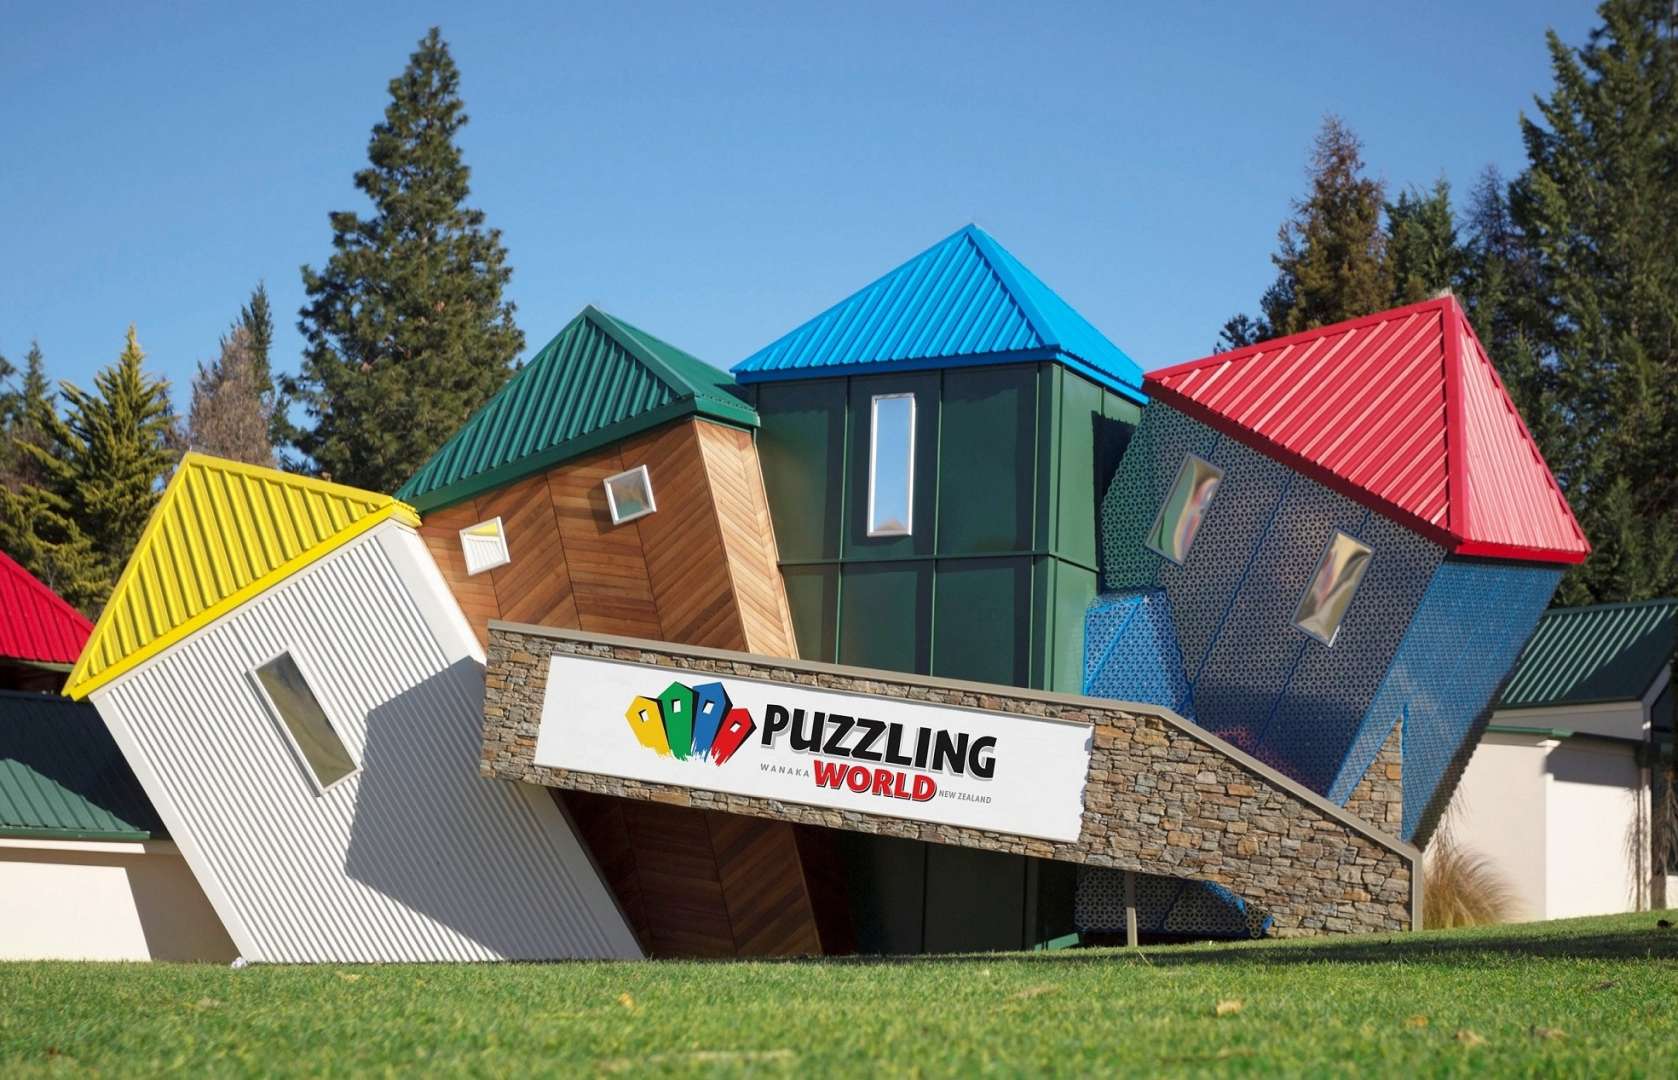 Tumbling Towers of Puzzling World